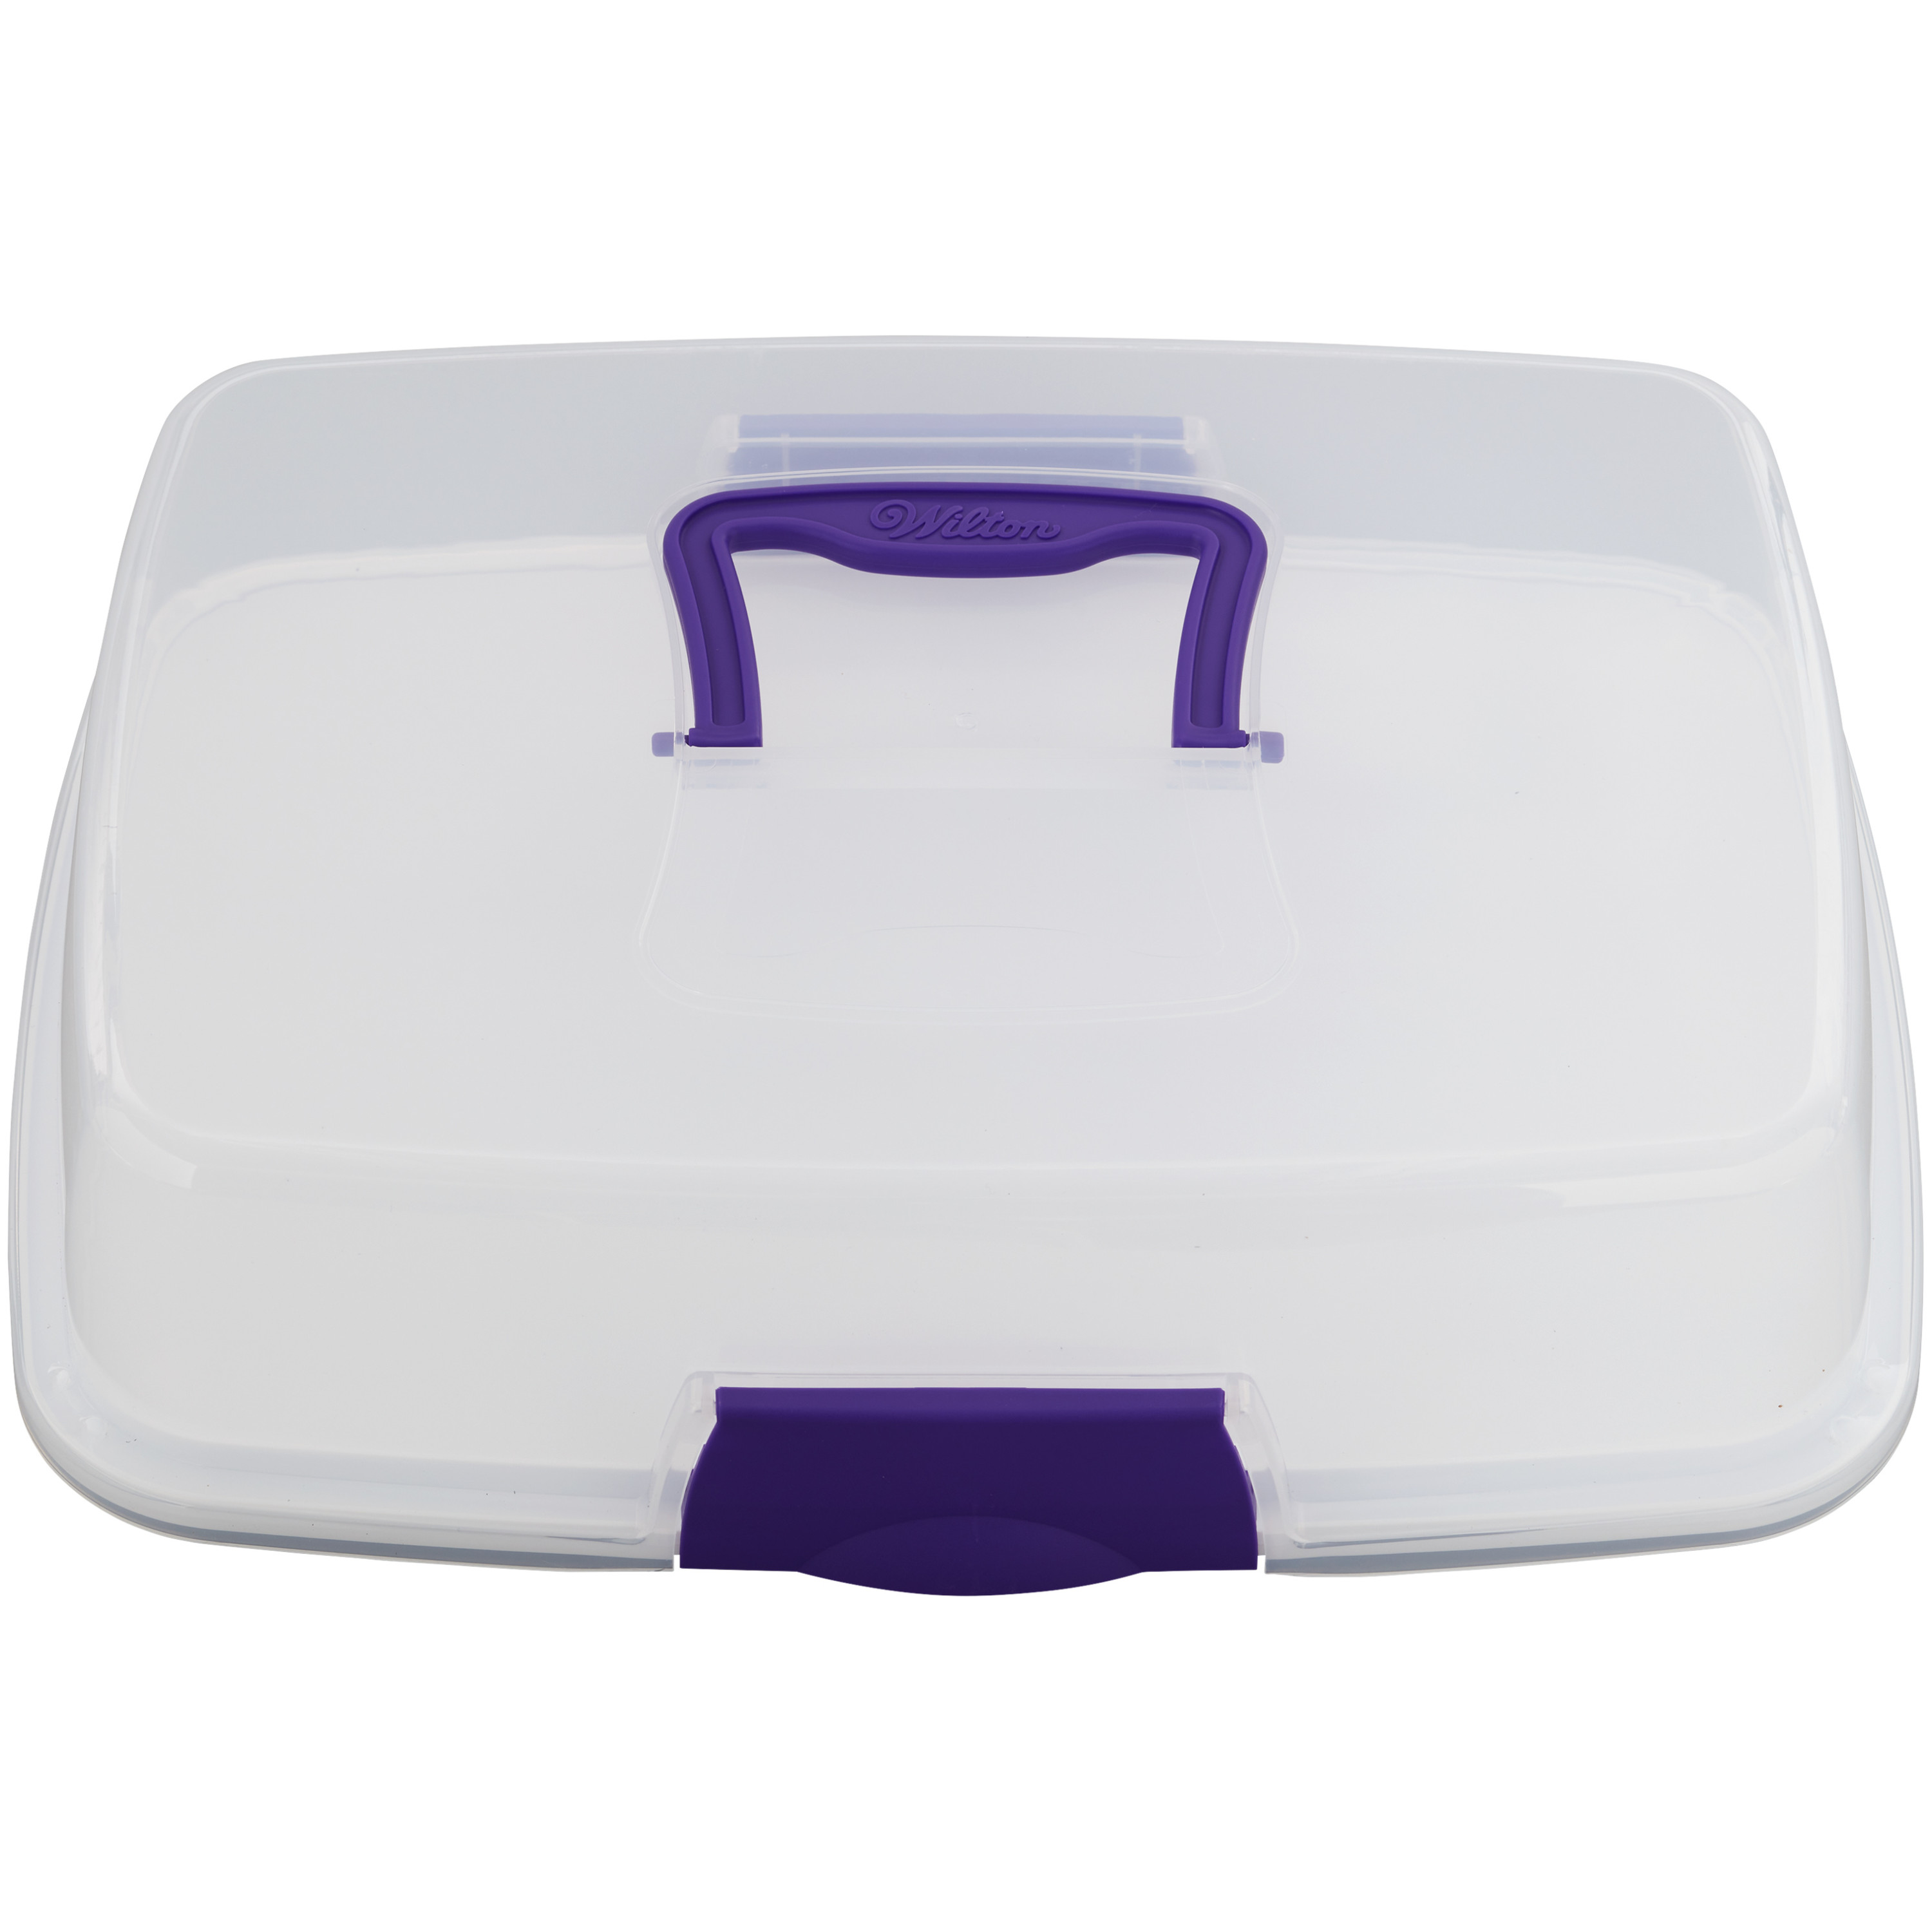 Wilton Oblong Cake and Cupcake Carrier, Practical Cupcake Container, Plastic - image 2 of 11